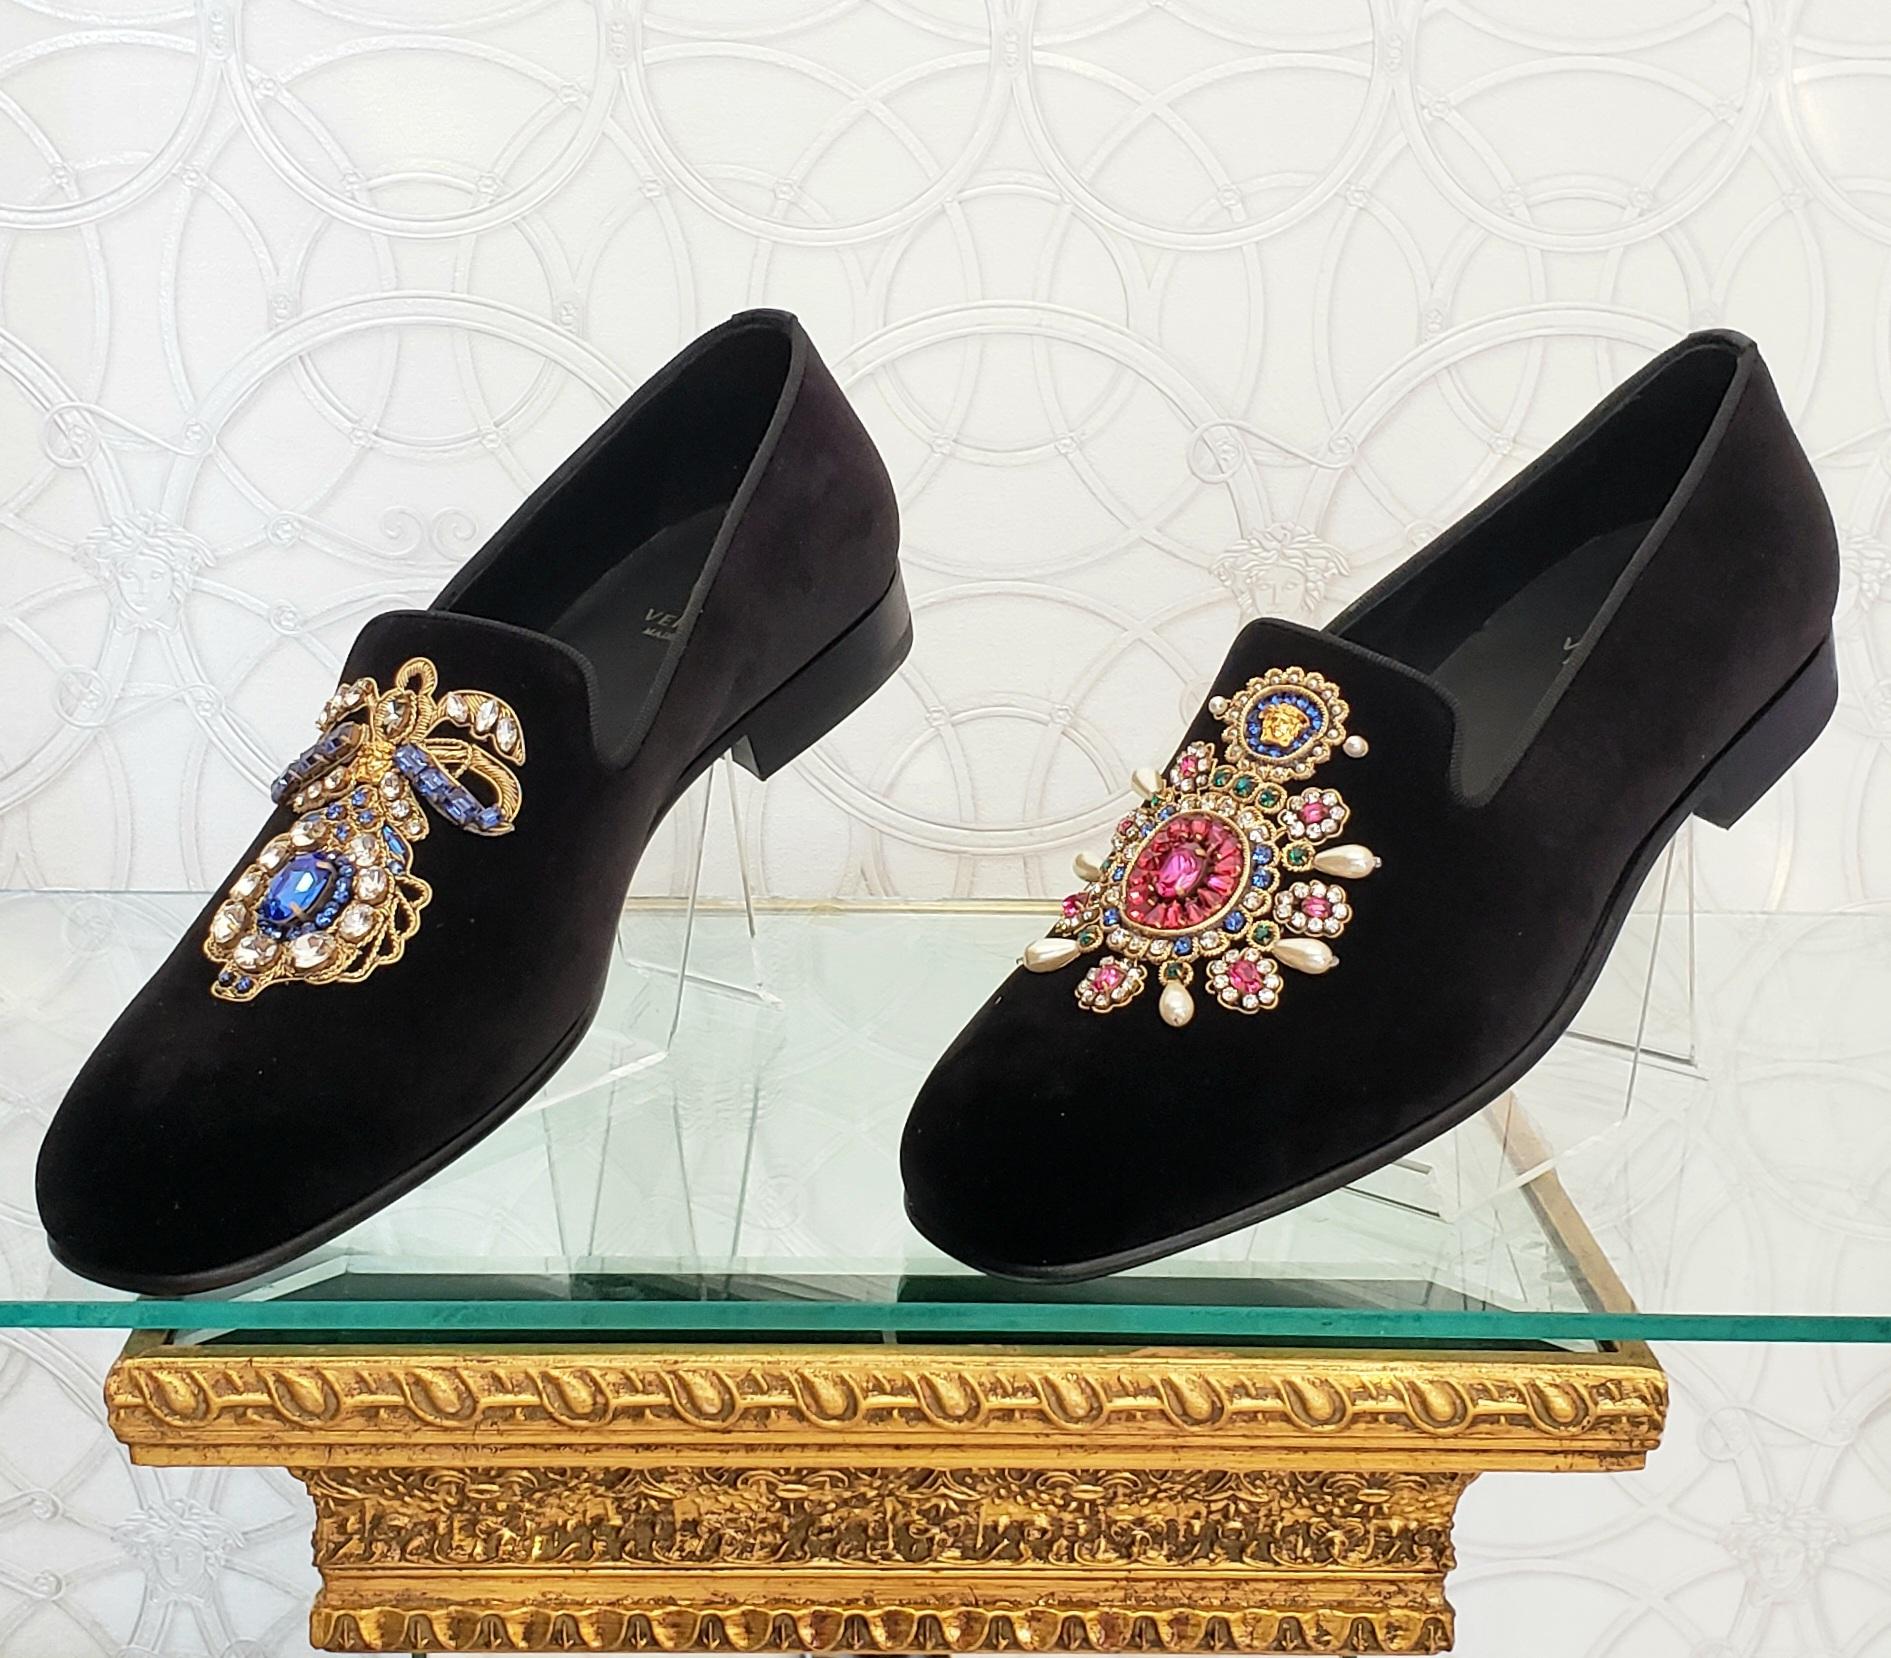 VERSACE ATELIER EDITION

BLACK VELVET JEWEL EMBELLISHED SMOKING  LOAFER

Velvet, leather, rhinestones, contrasting applications, solid color with appliqués, leather lining, round toe line, flat, leather sole, contains non-textile parts of animal